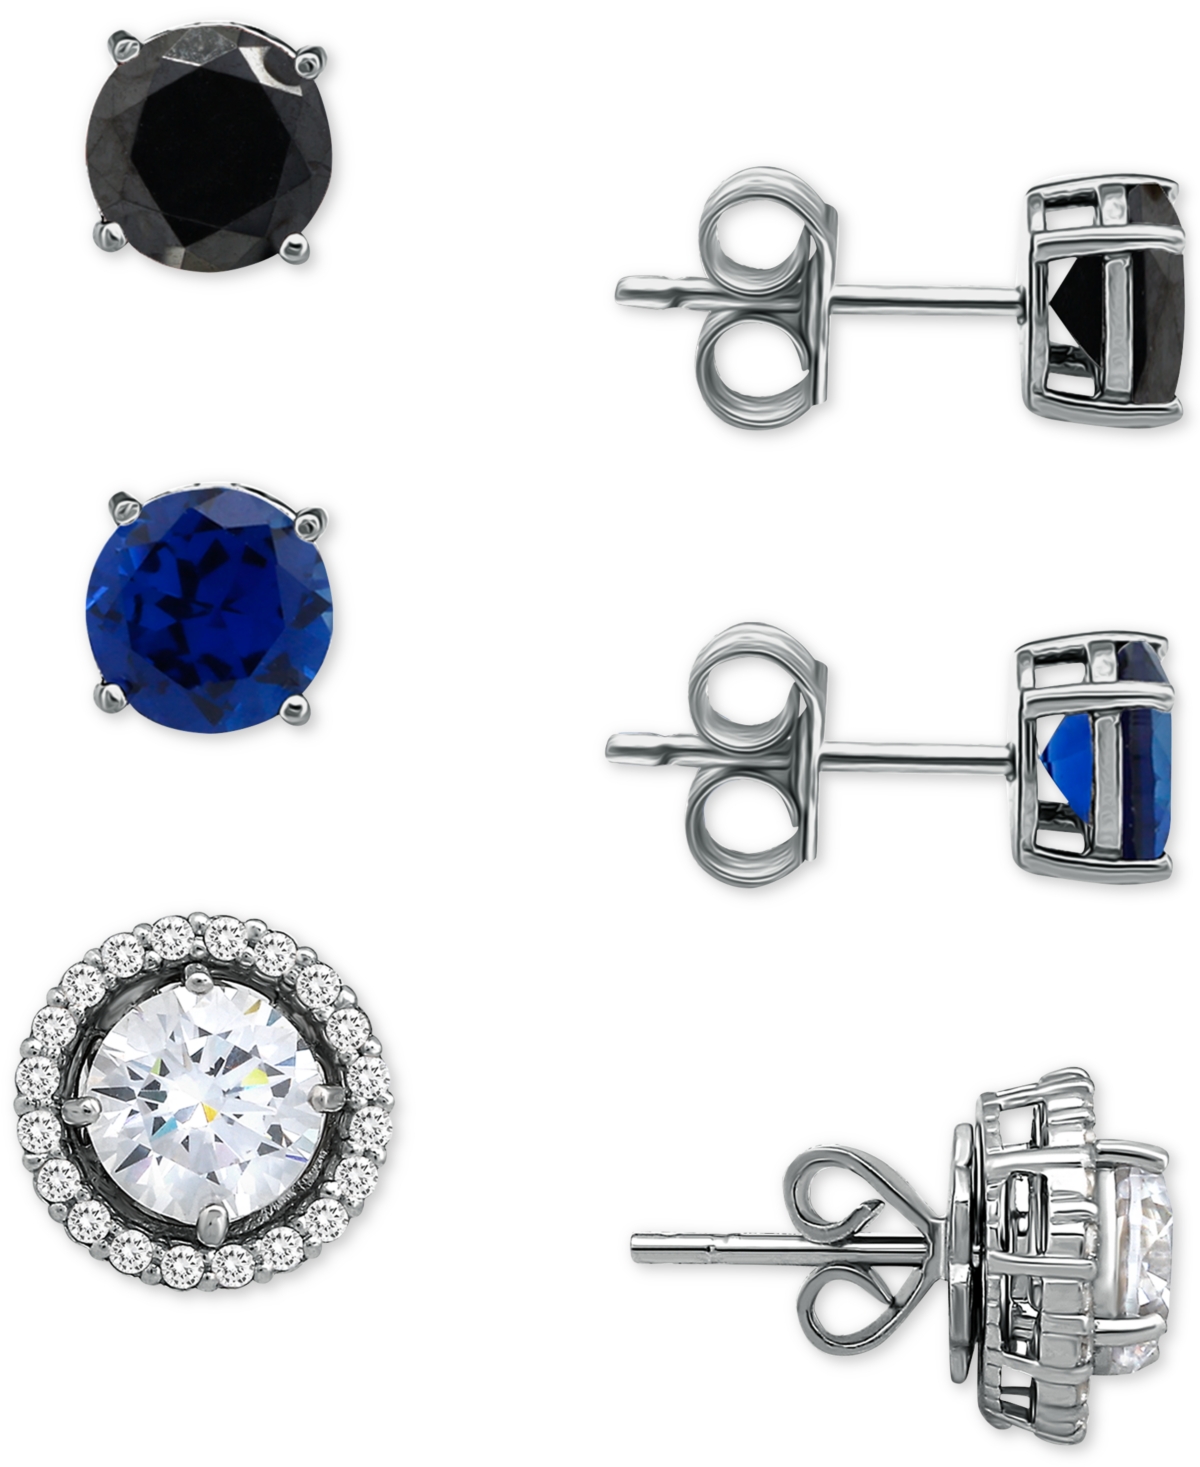 3-Pc. Set Multicolor Cubic Zirconia Stud Earrings with Interchangeable Halo Jackets in Sterling Silver, Created for Macy's - Multi